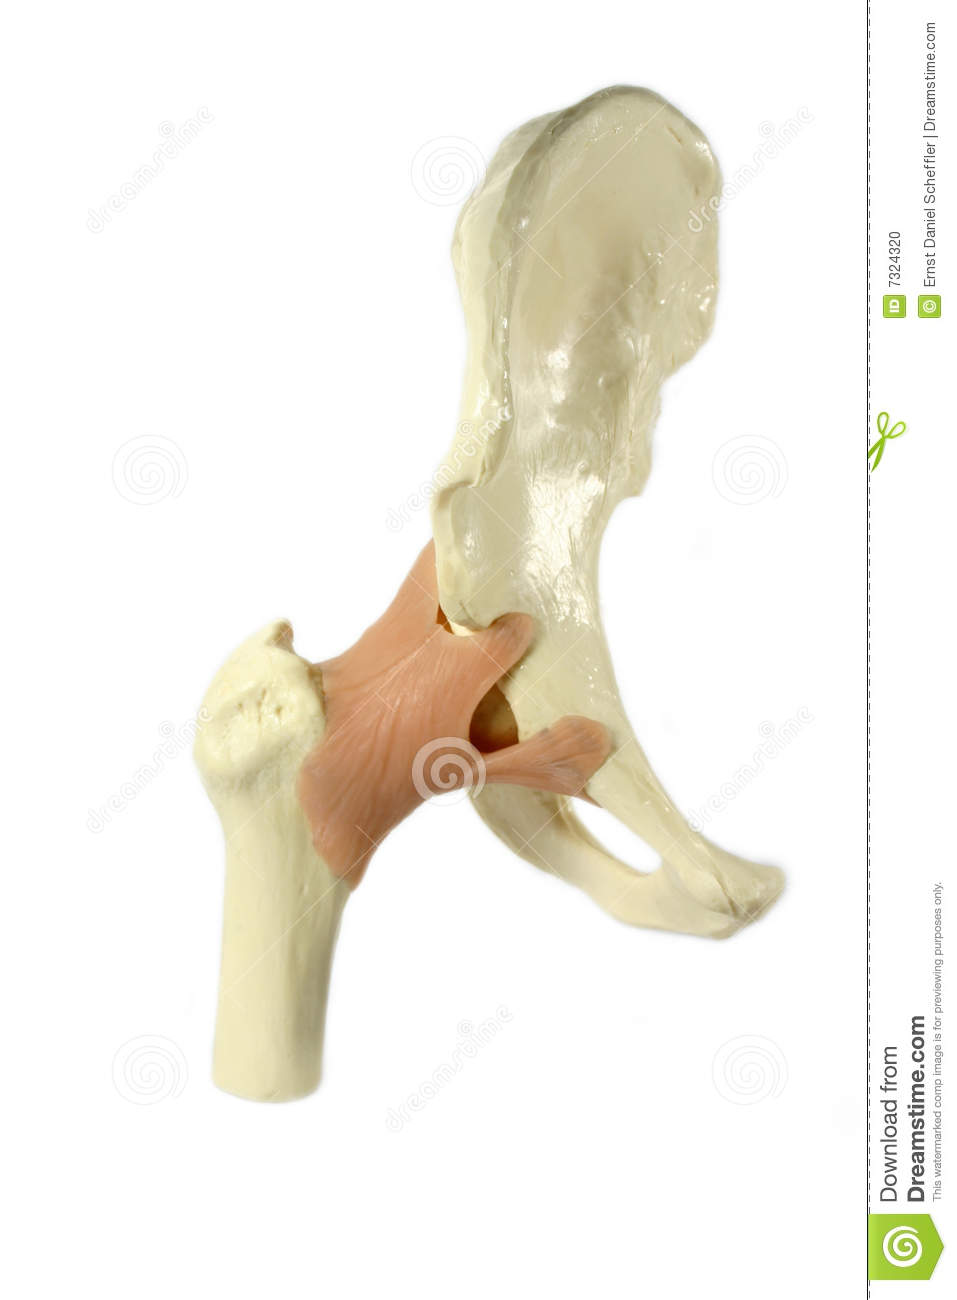 Model Of A Human Right Hip Joint Isolated On A White Background